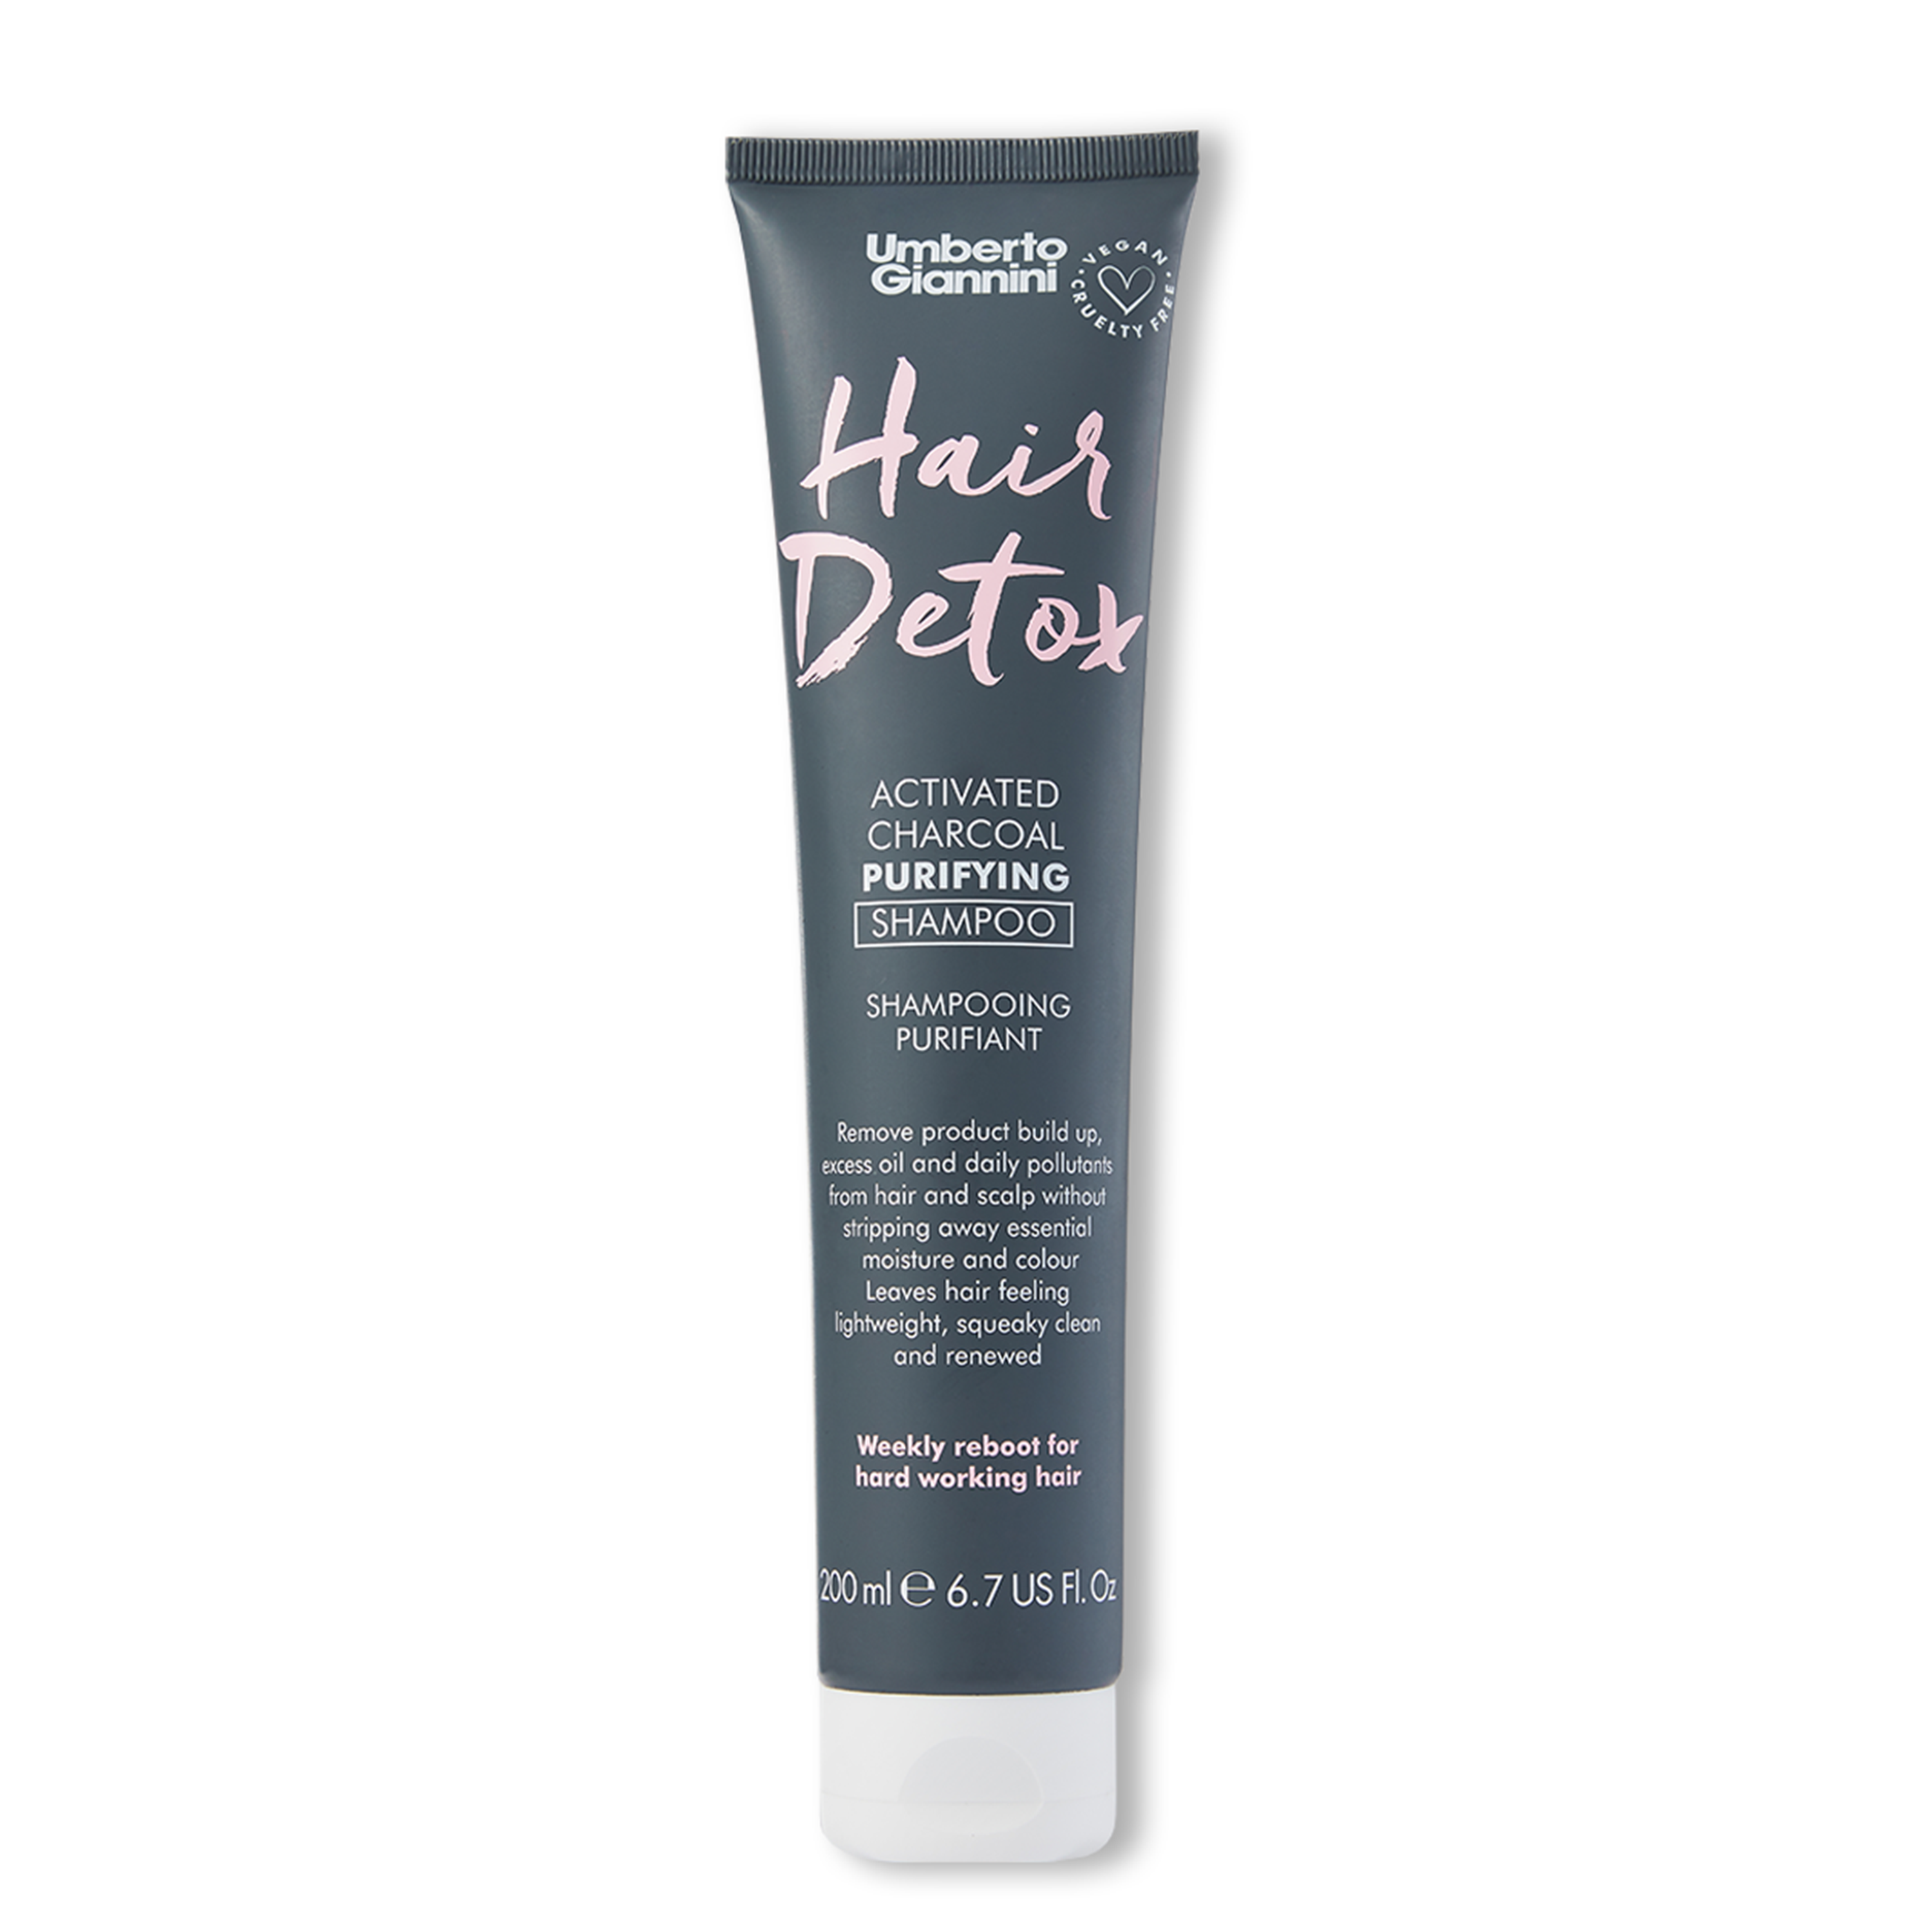 Hair Detox Activated Charcoal Purifying Shampoo